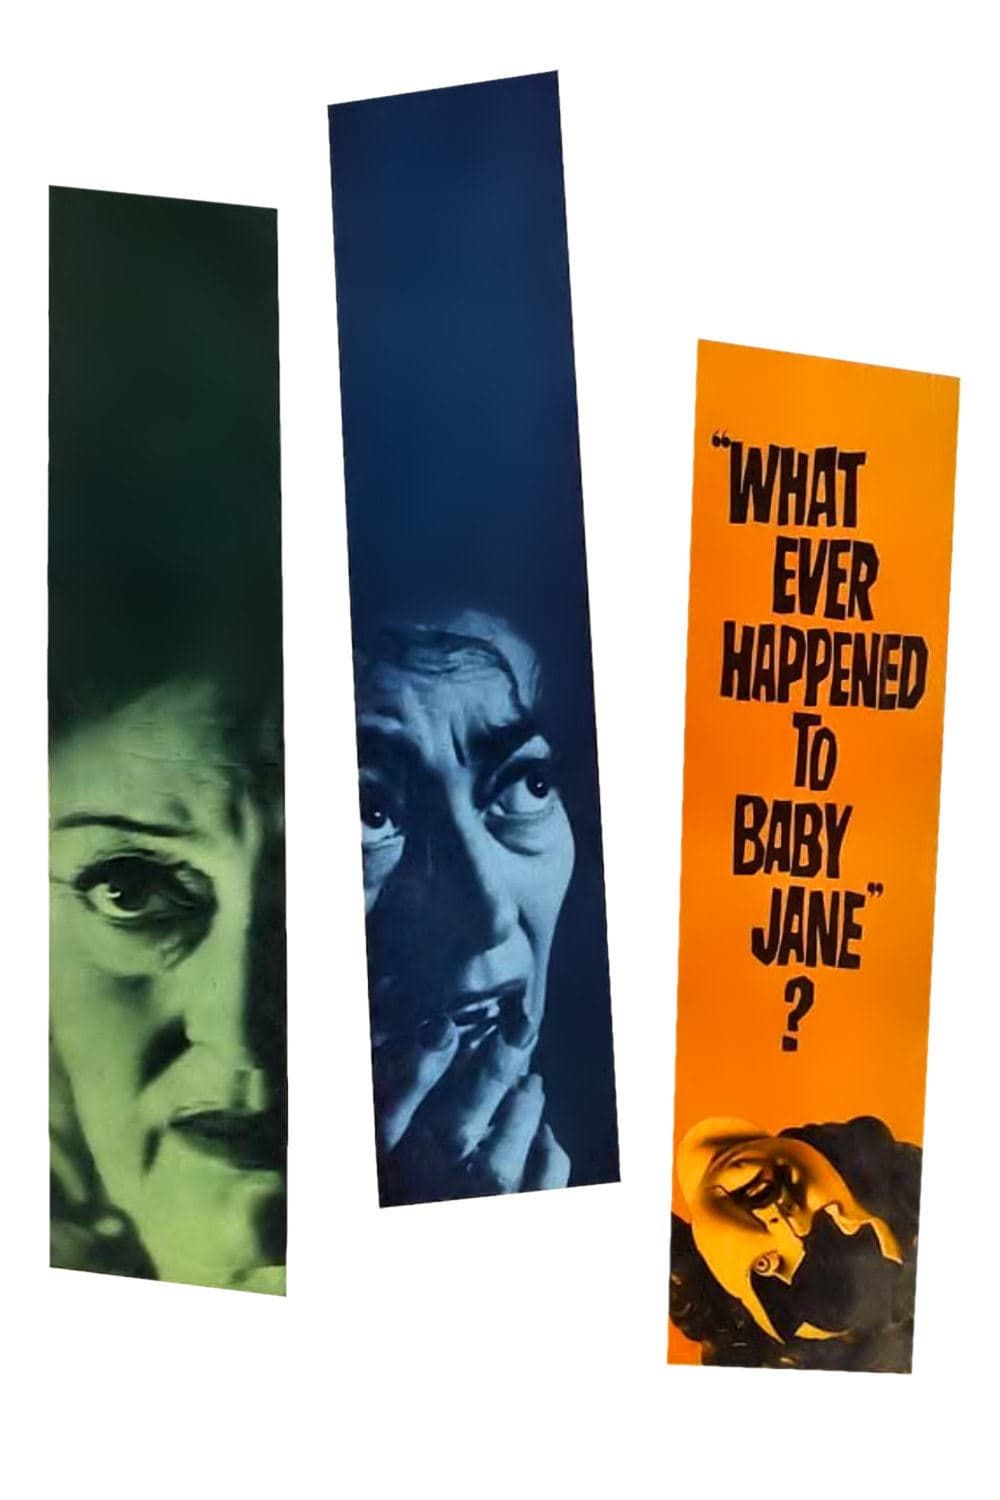 what ever happened to baby jane?